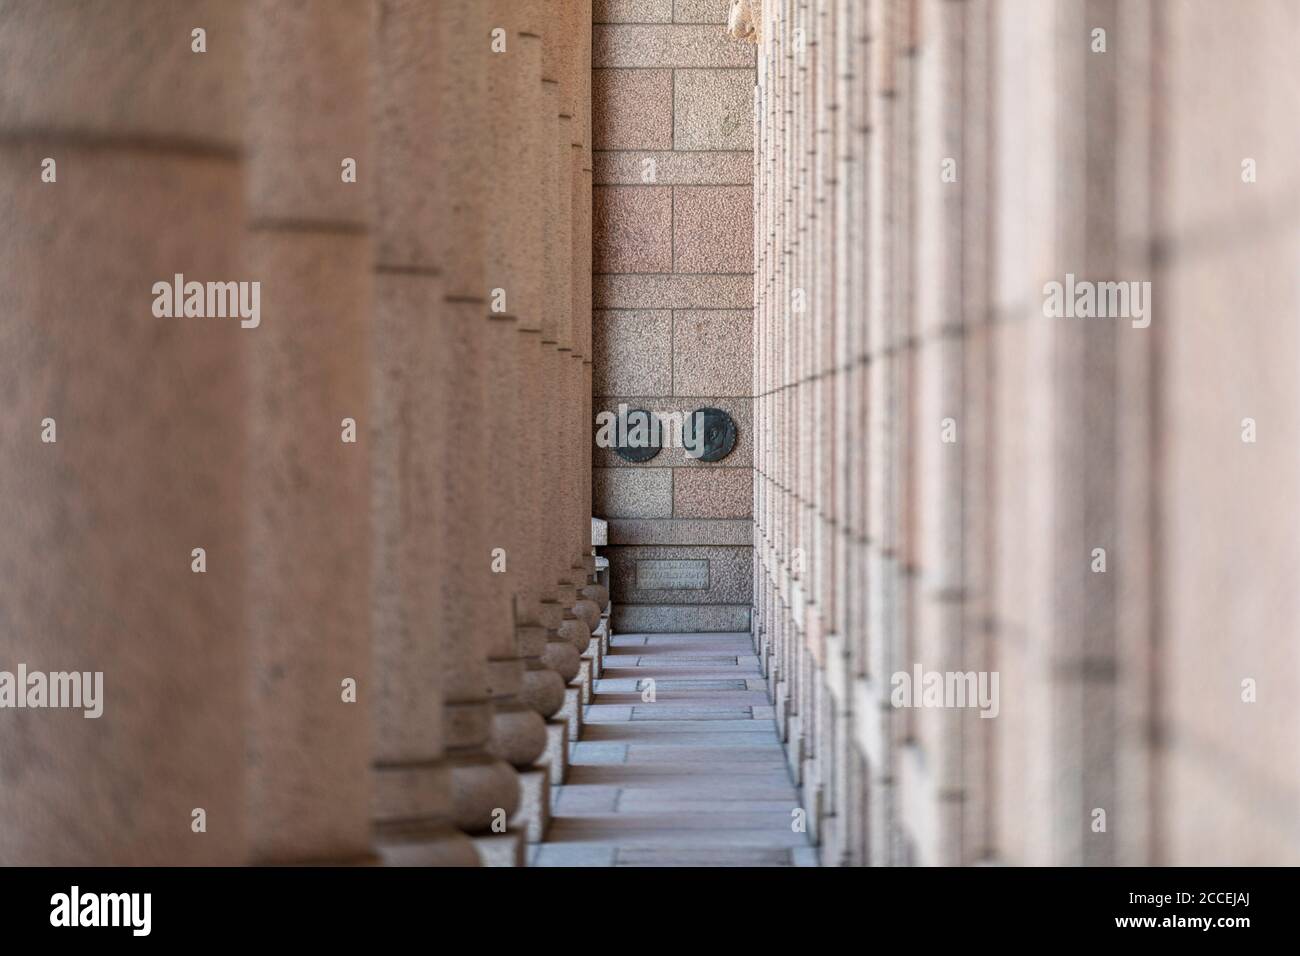 Red granite colonnade is a trade mark feature of Finnish parliament building. On back wall is the name and signature of architect: J.S.Siren. Stock Photo